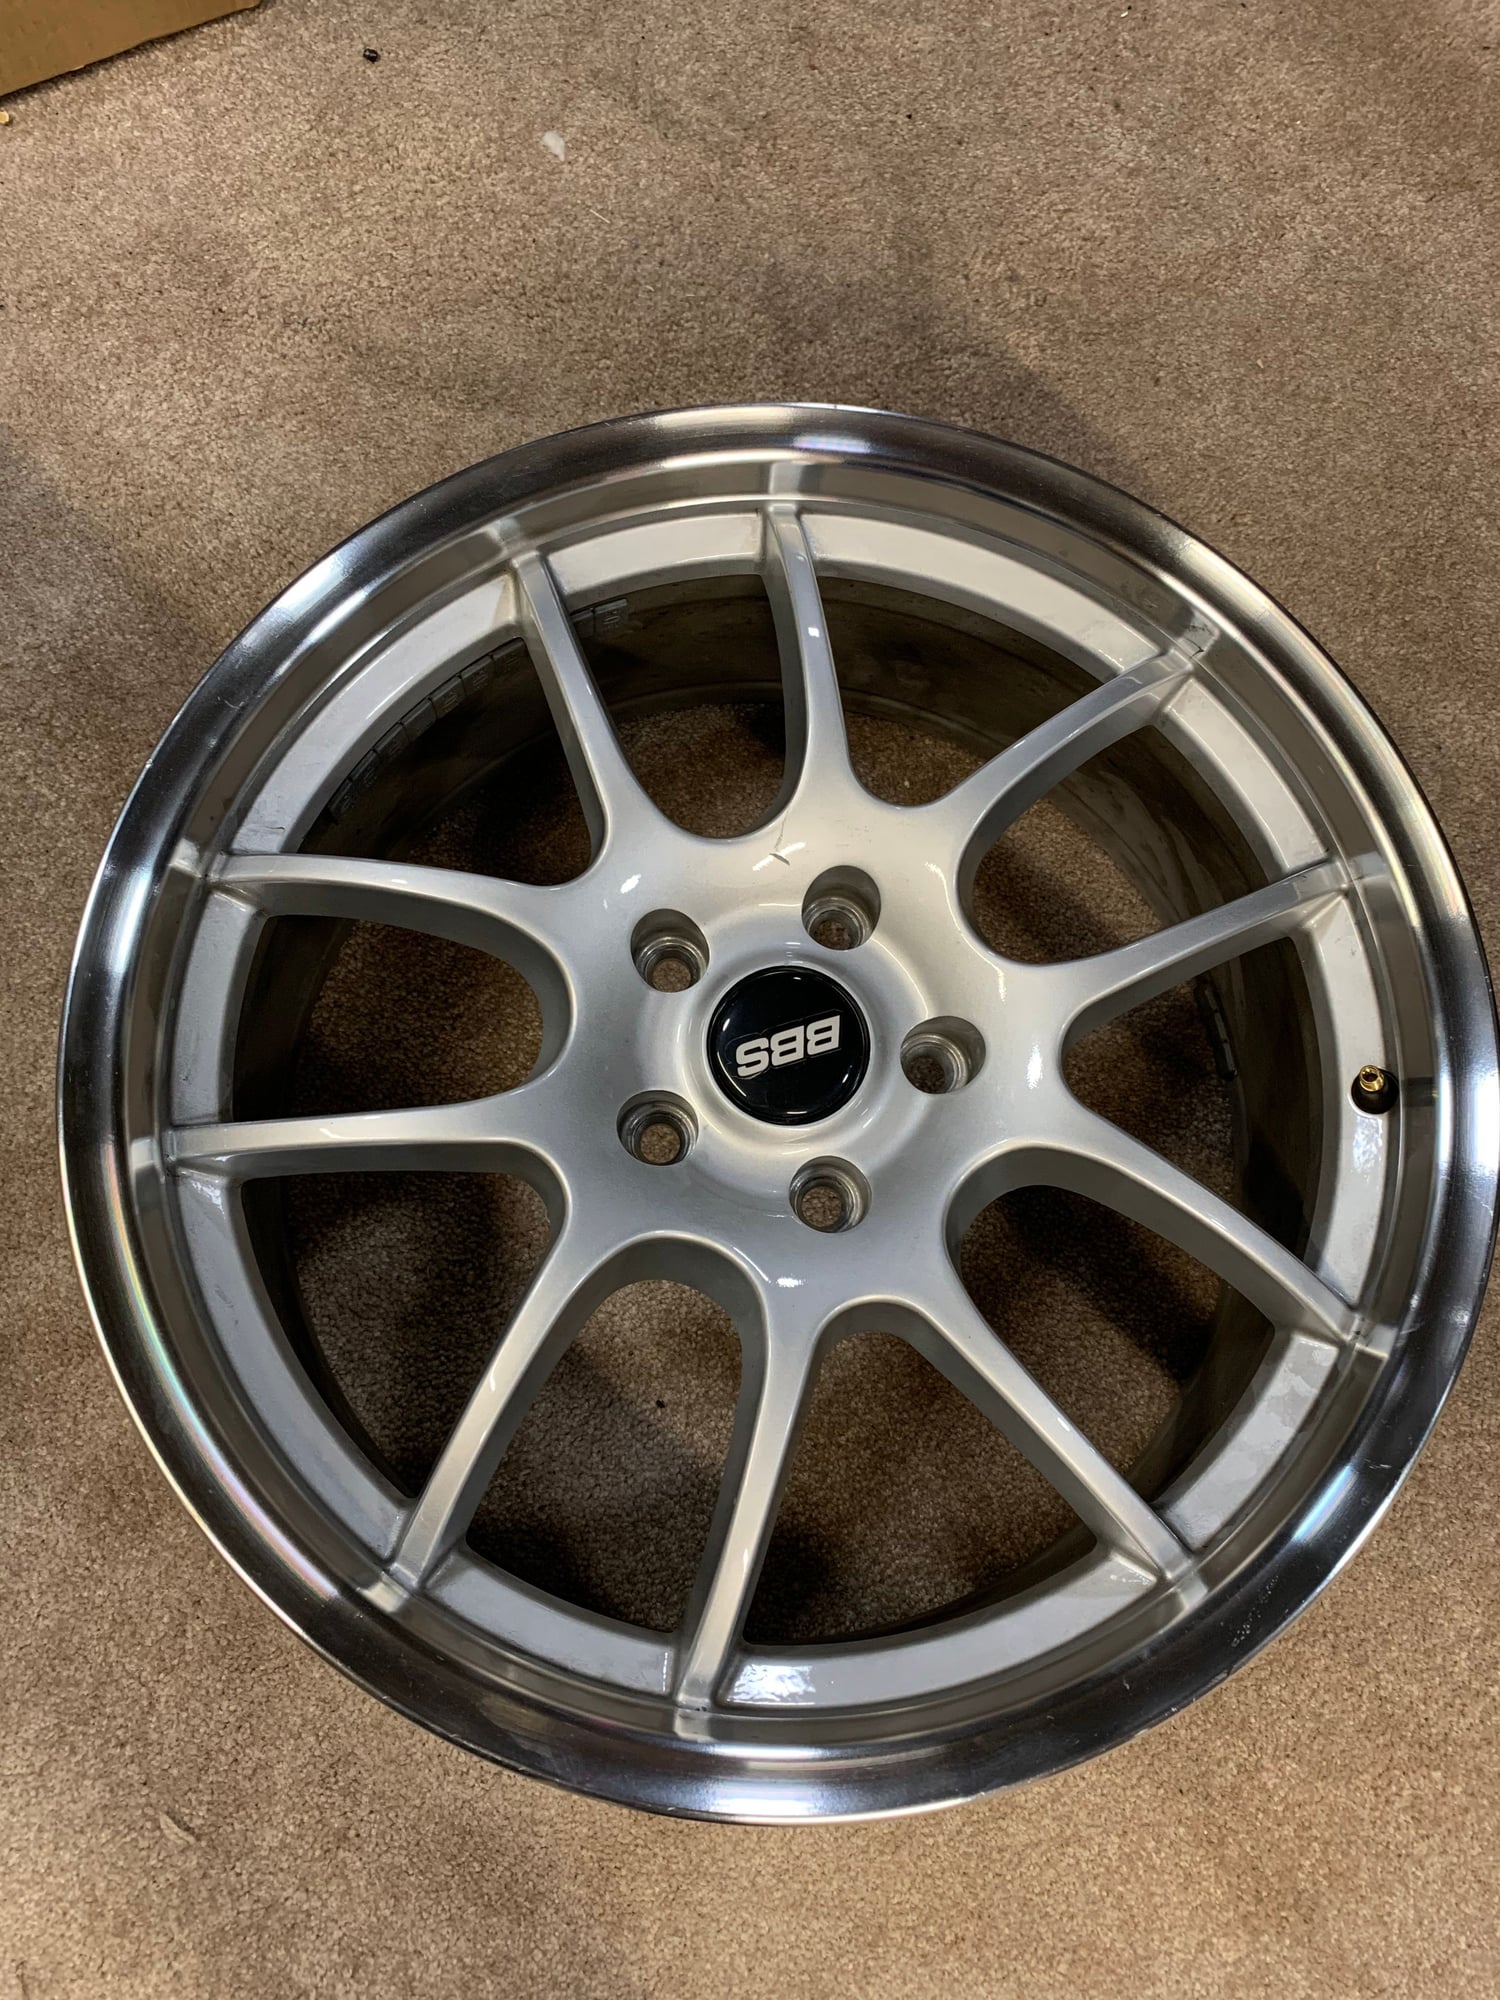 Wheels and Tires/Axles - R170 VOXX 18” rims - Used - 1999 to 2003 Mercedes-Benz SLK230 - Irvington, NY 10533, United States